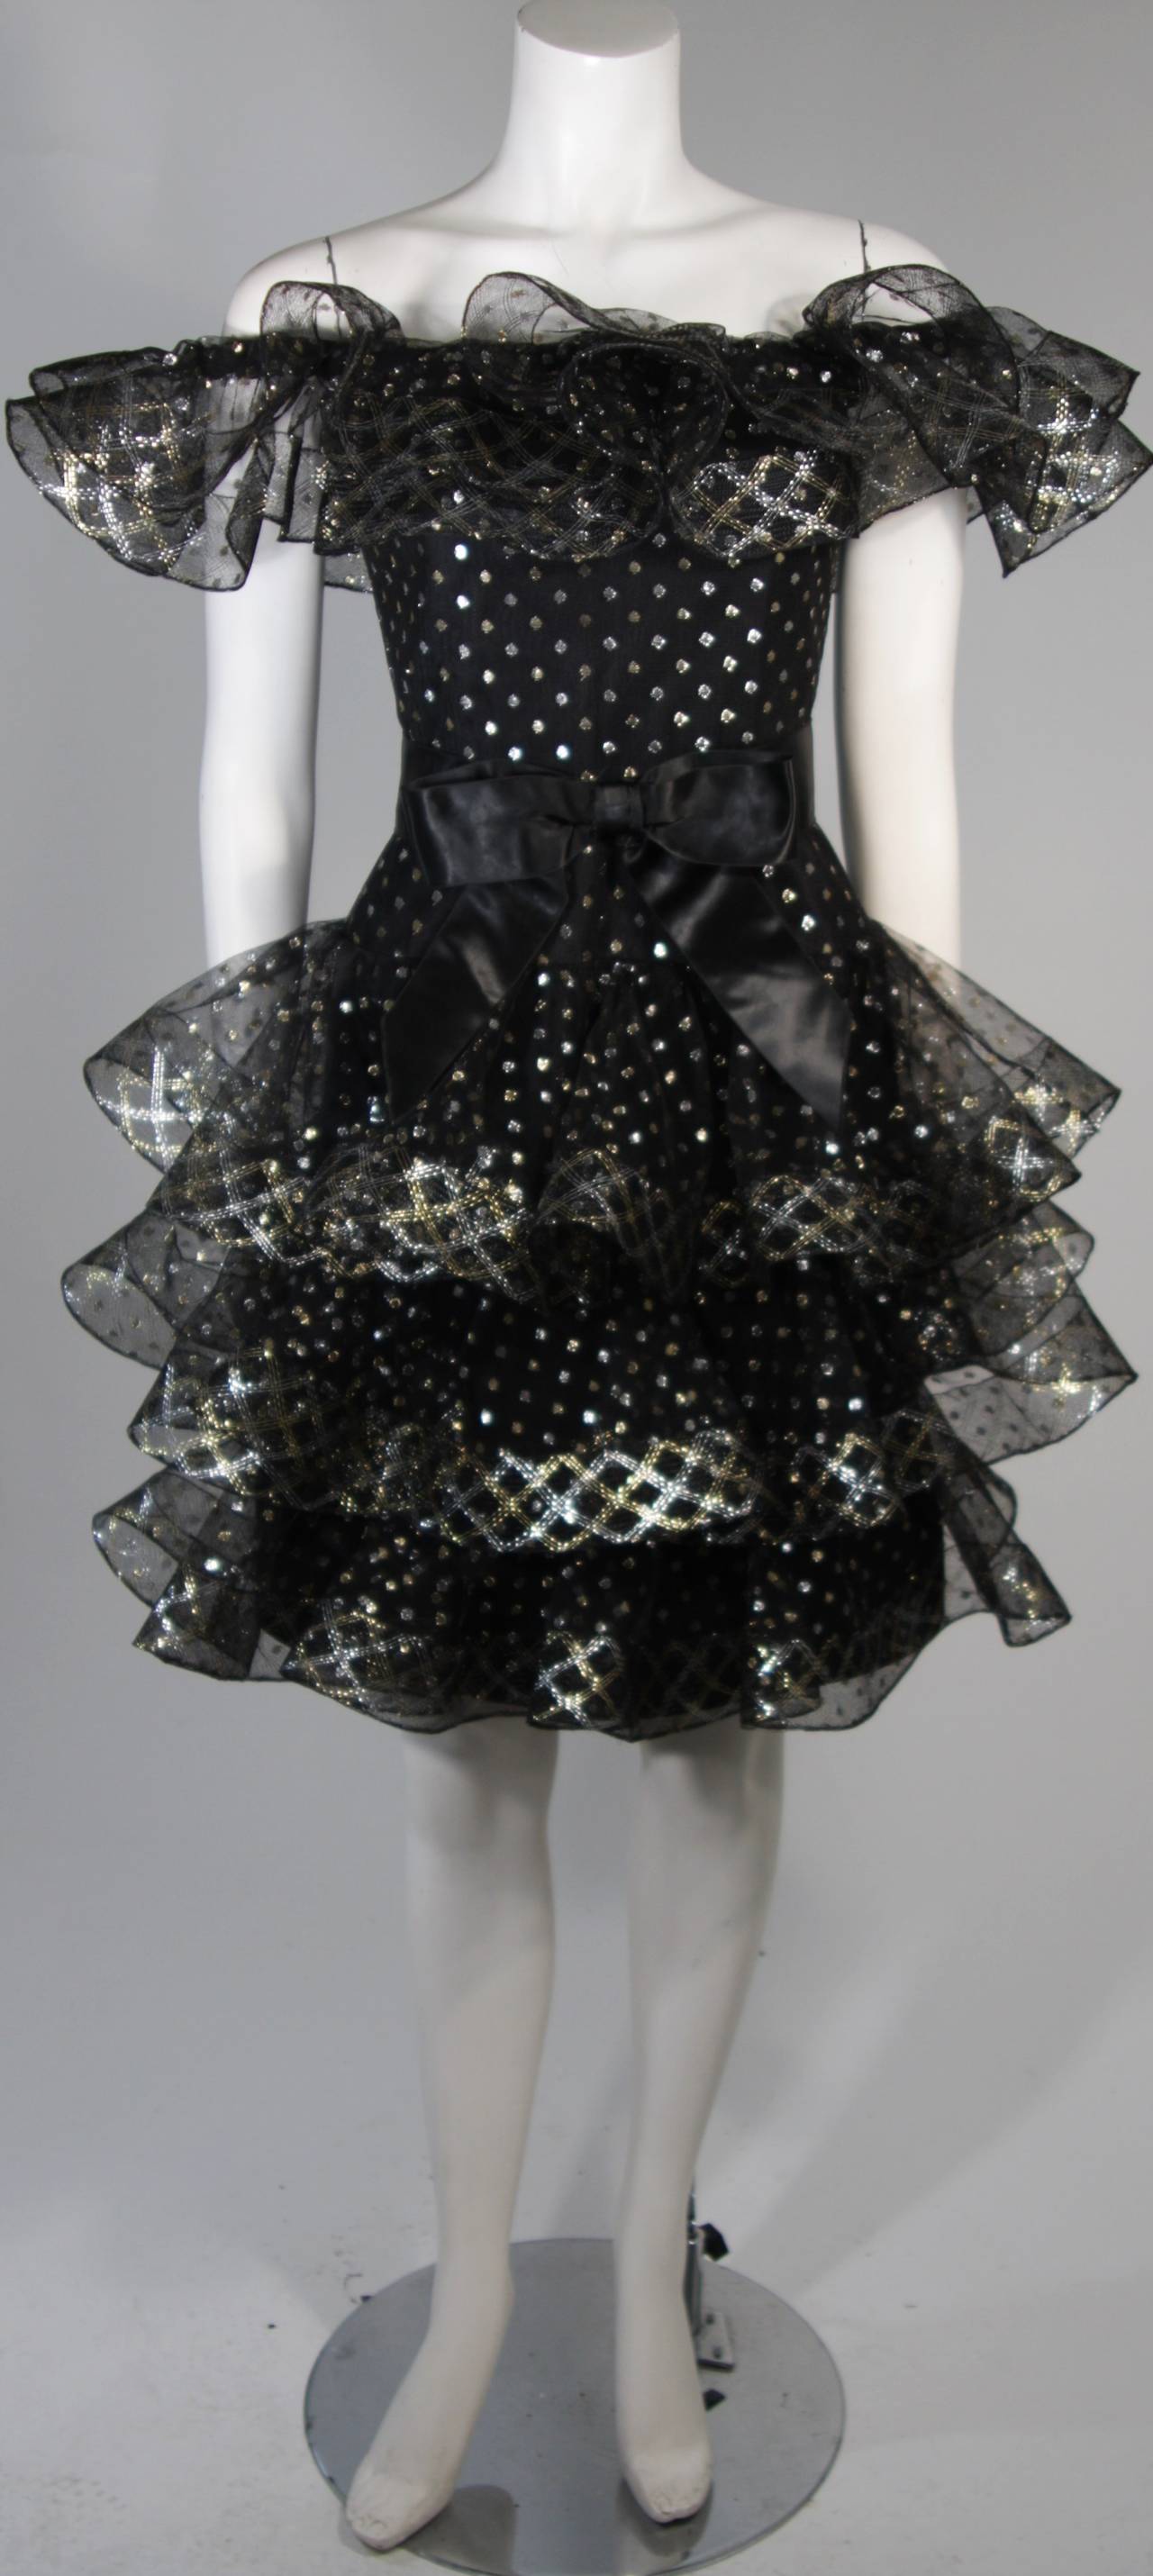 This Victor Costa cocktail dress is fabricated from layers of black mesh fabric accented with silver and gold metallic polka dots. The ruffled hem lines are slightly structured due to the 